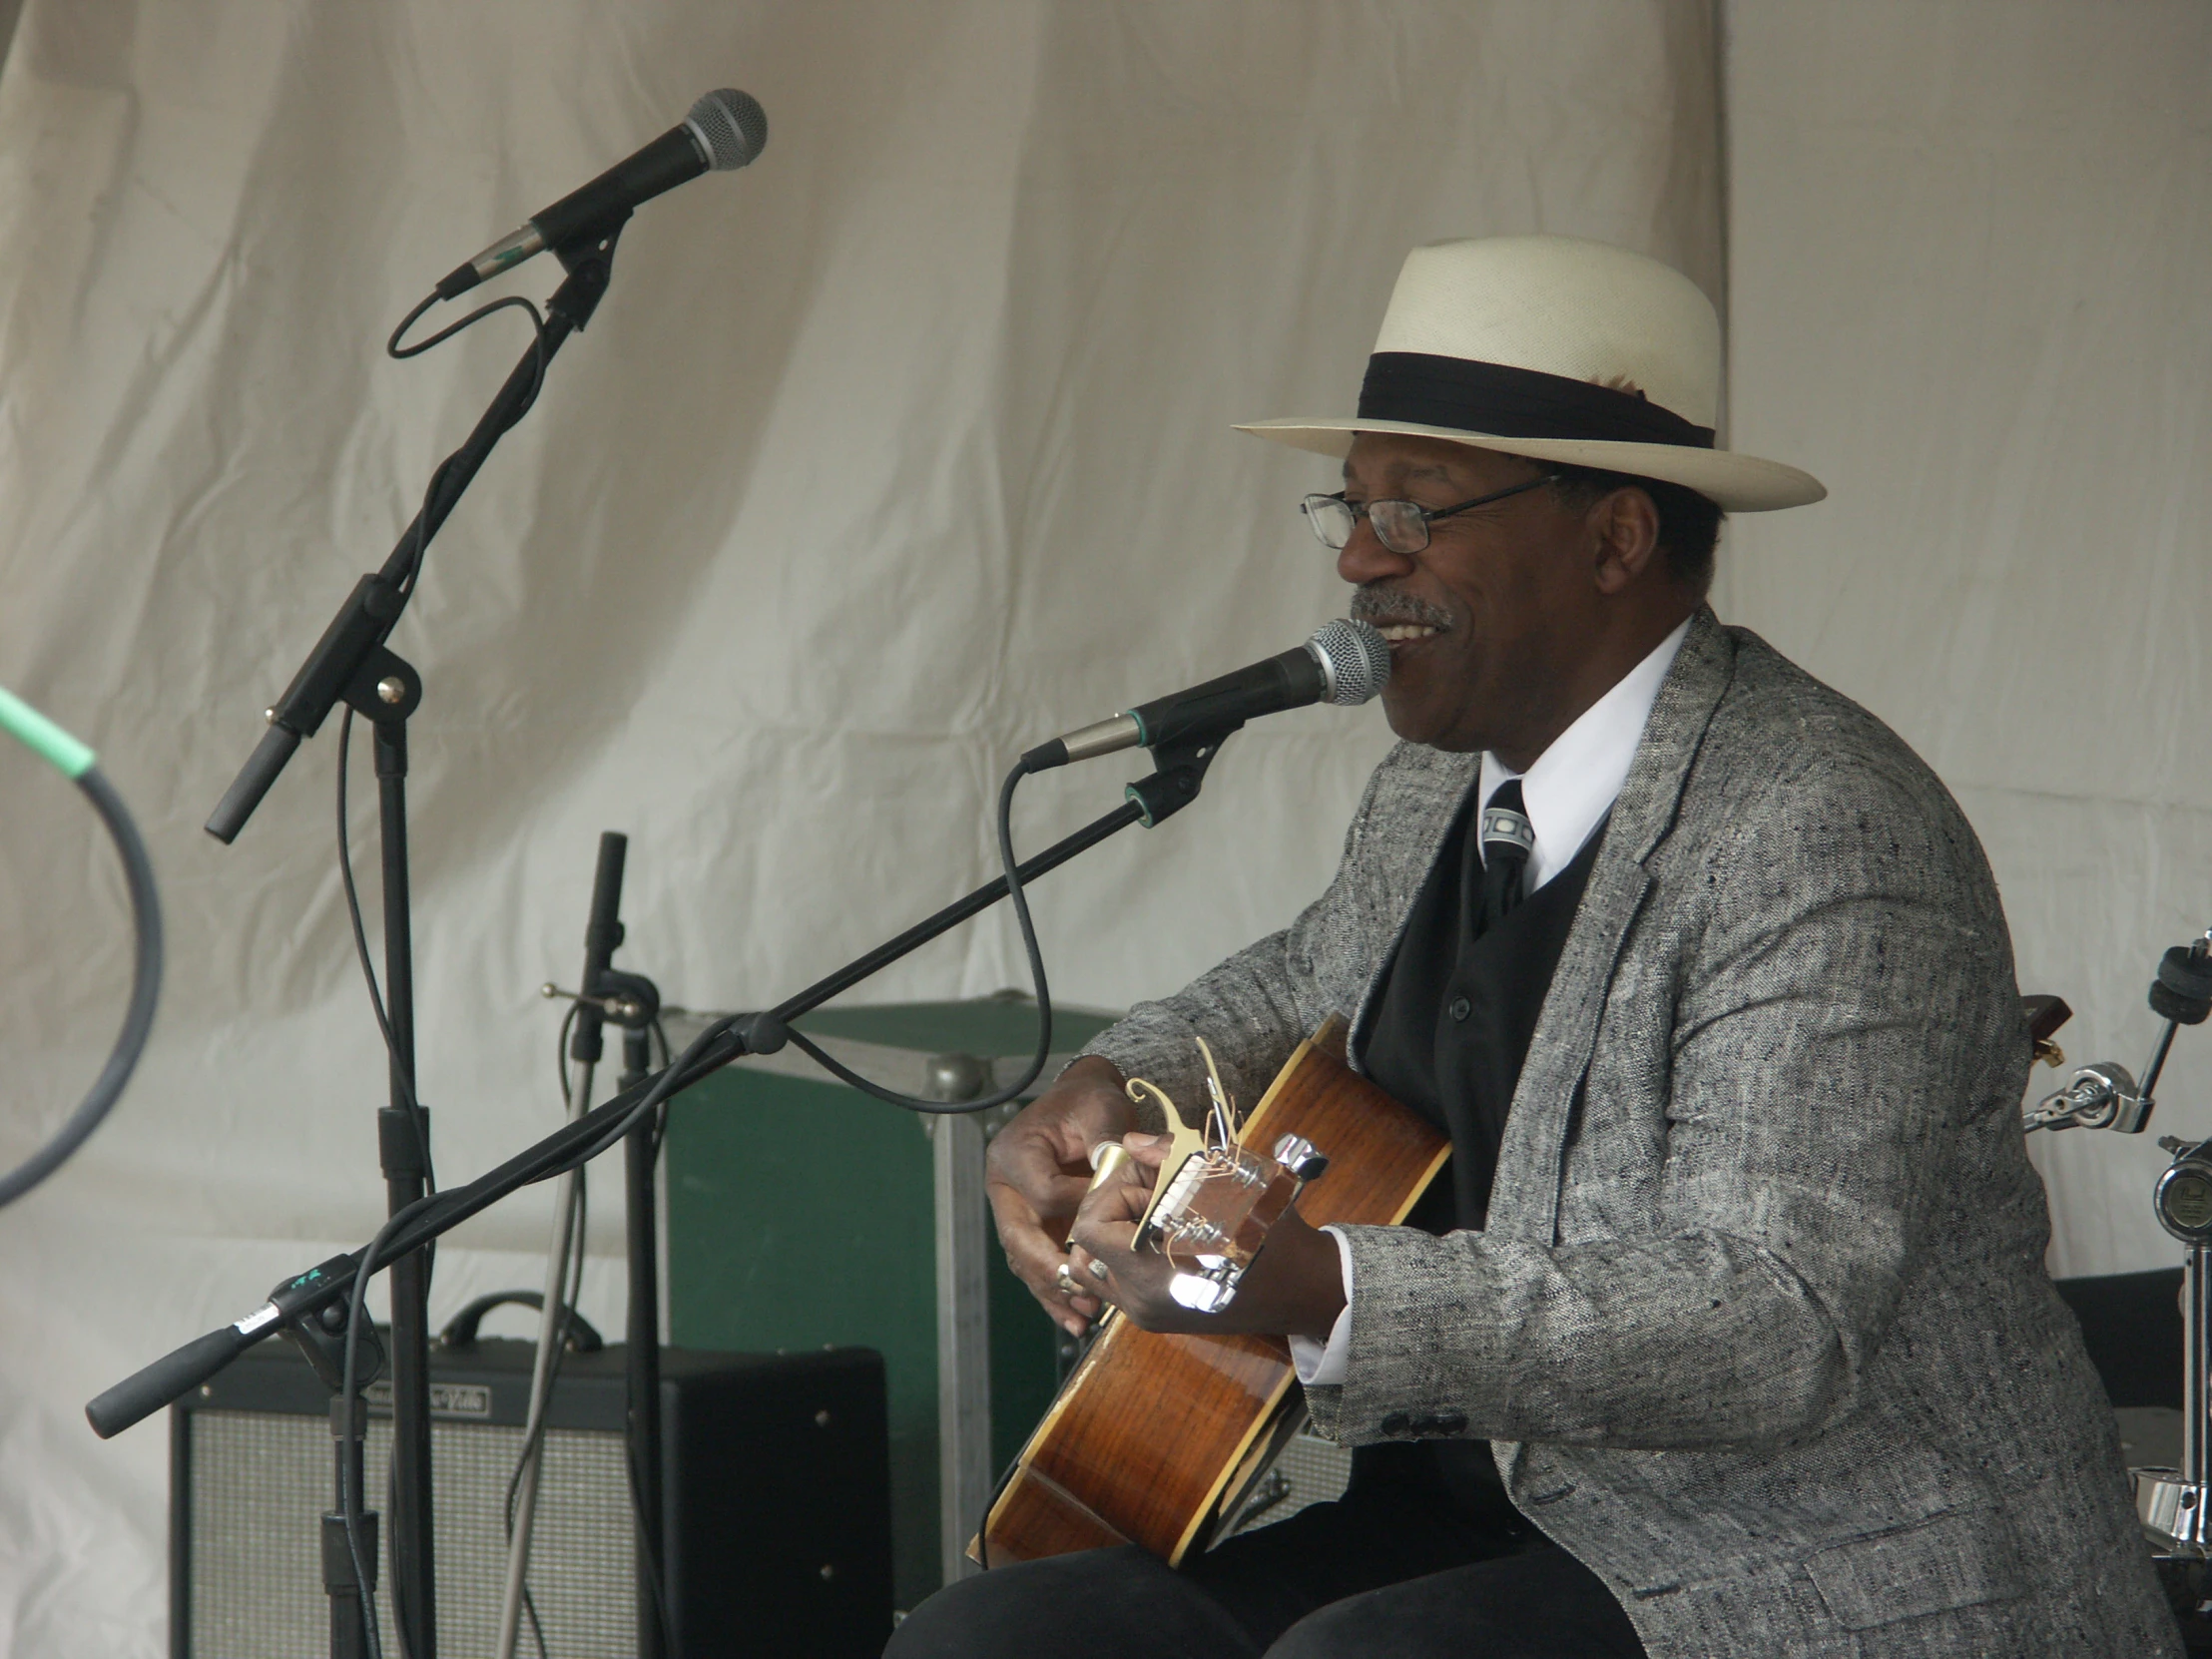 a man in suit playing a guitar while standing in front of microphones